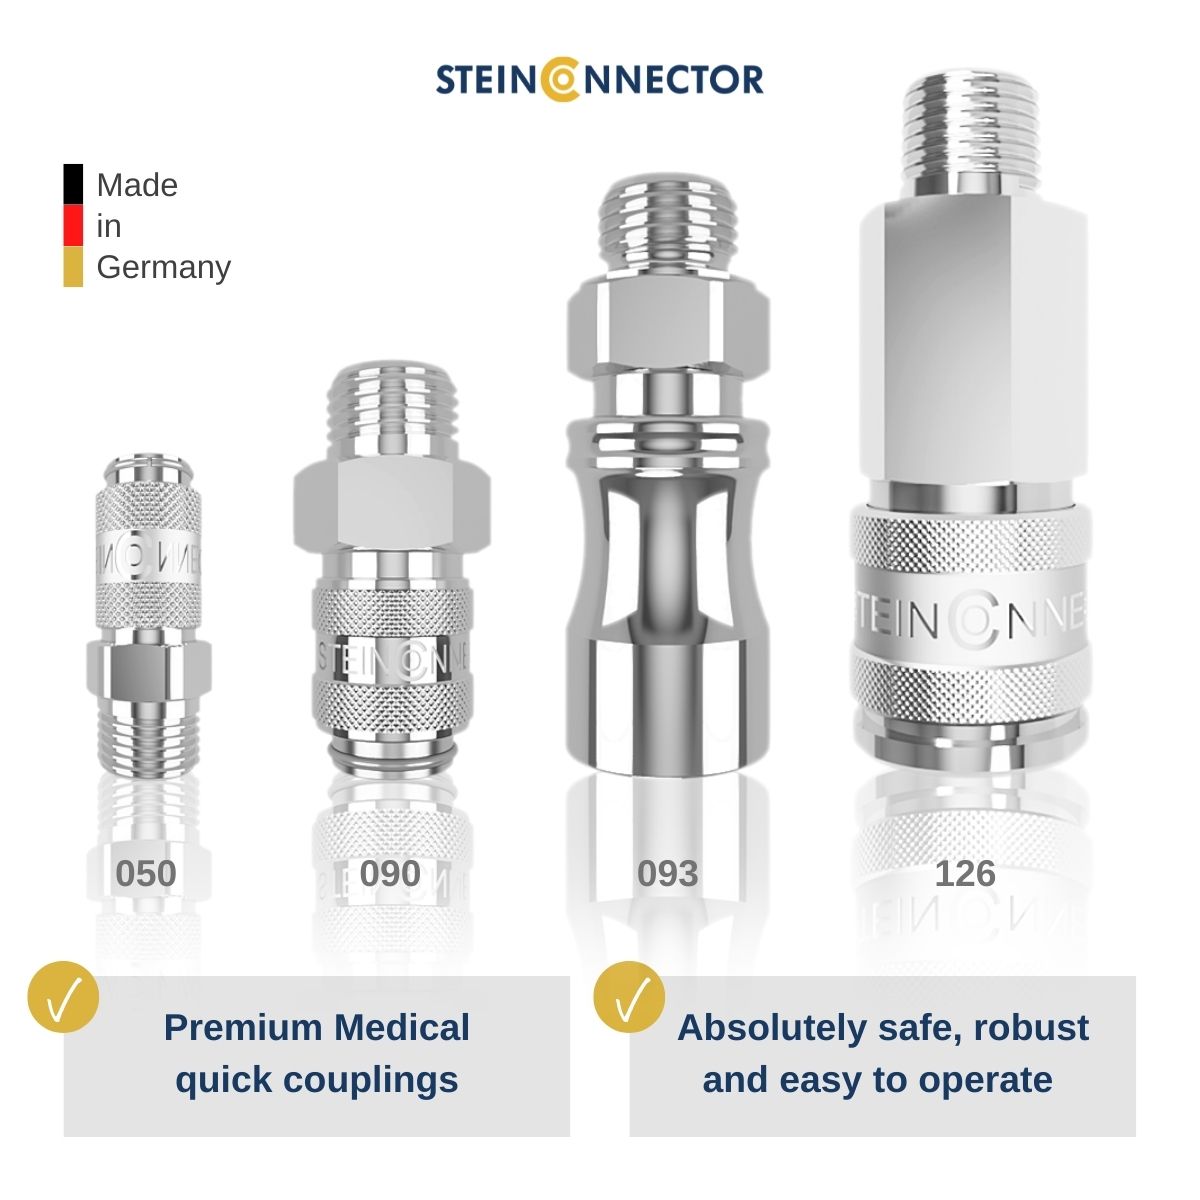 Medical sterile couplings & KEy couplings for hospitals, clinics, hospitals, medical practices, dental practices & laboratories in premium quality - specially developed for medical technology.